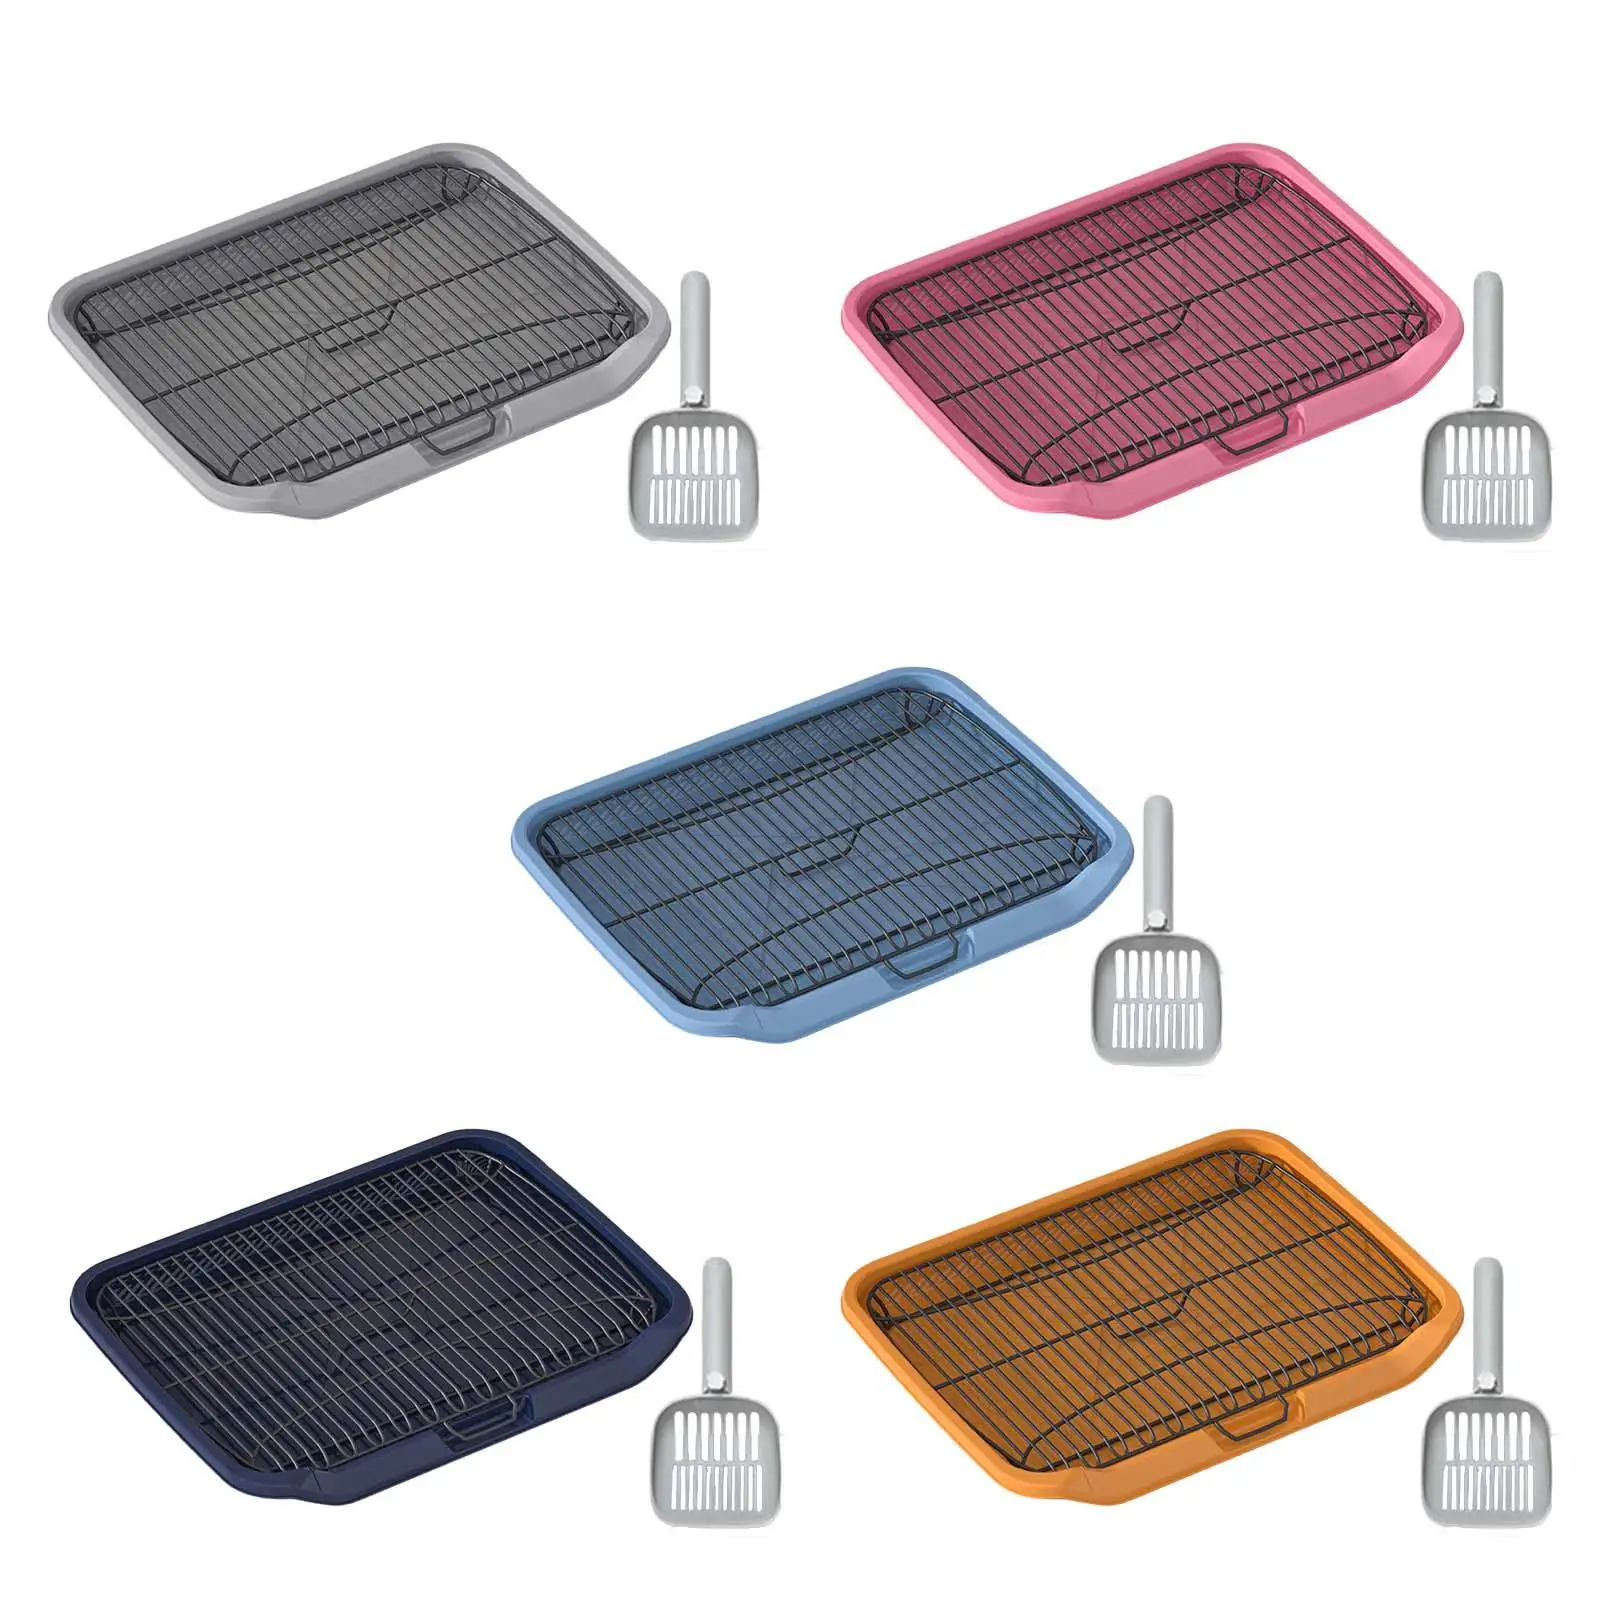 Pet Dog Toilet Puppy Training Potty Tray Removable Pet Litter Box for Small and Medium Dog Trainer Corner Pad Holder